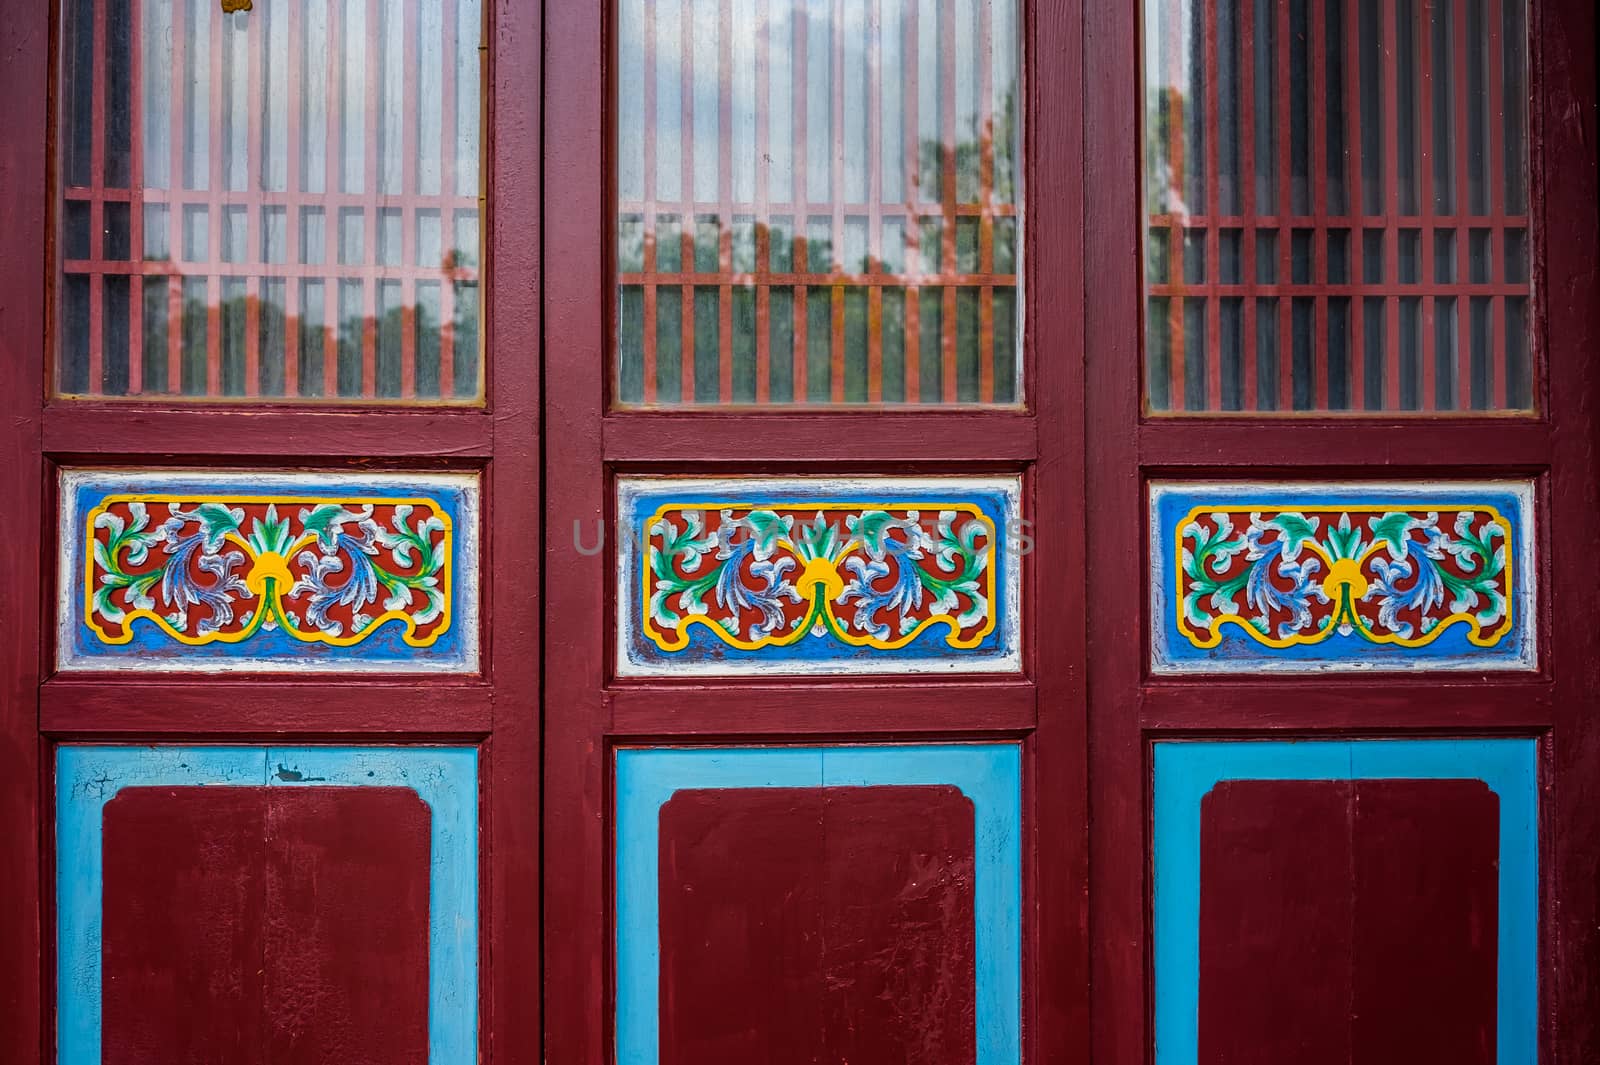 Traditional Chinese Building with Chinese Artwork on Doors